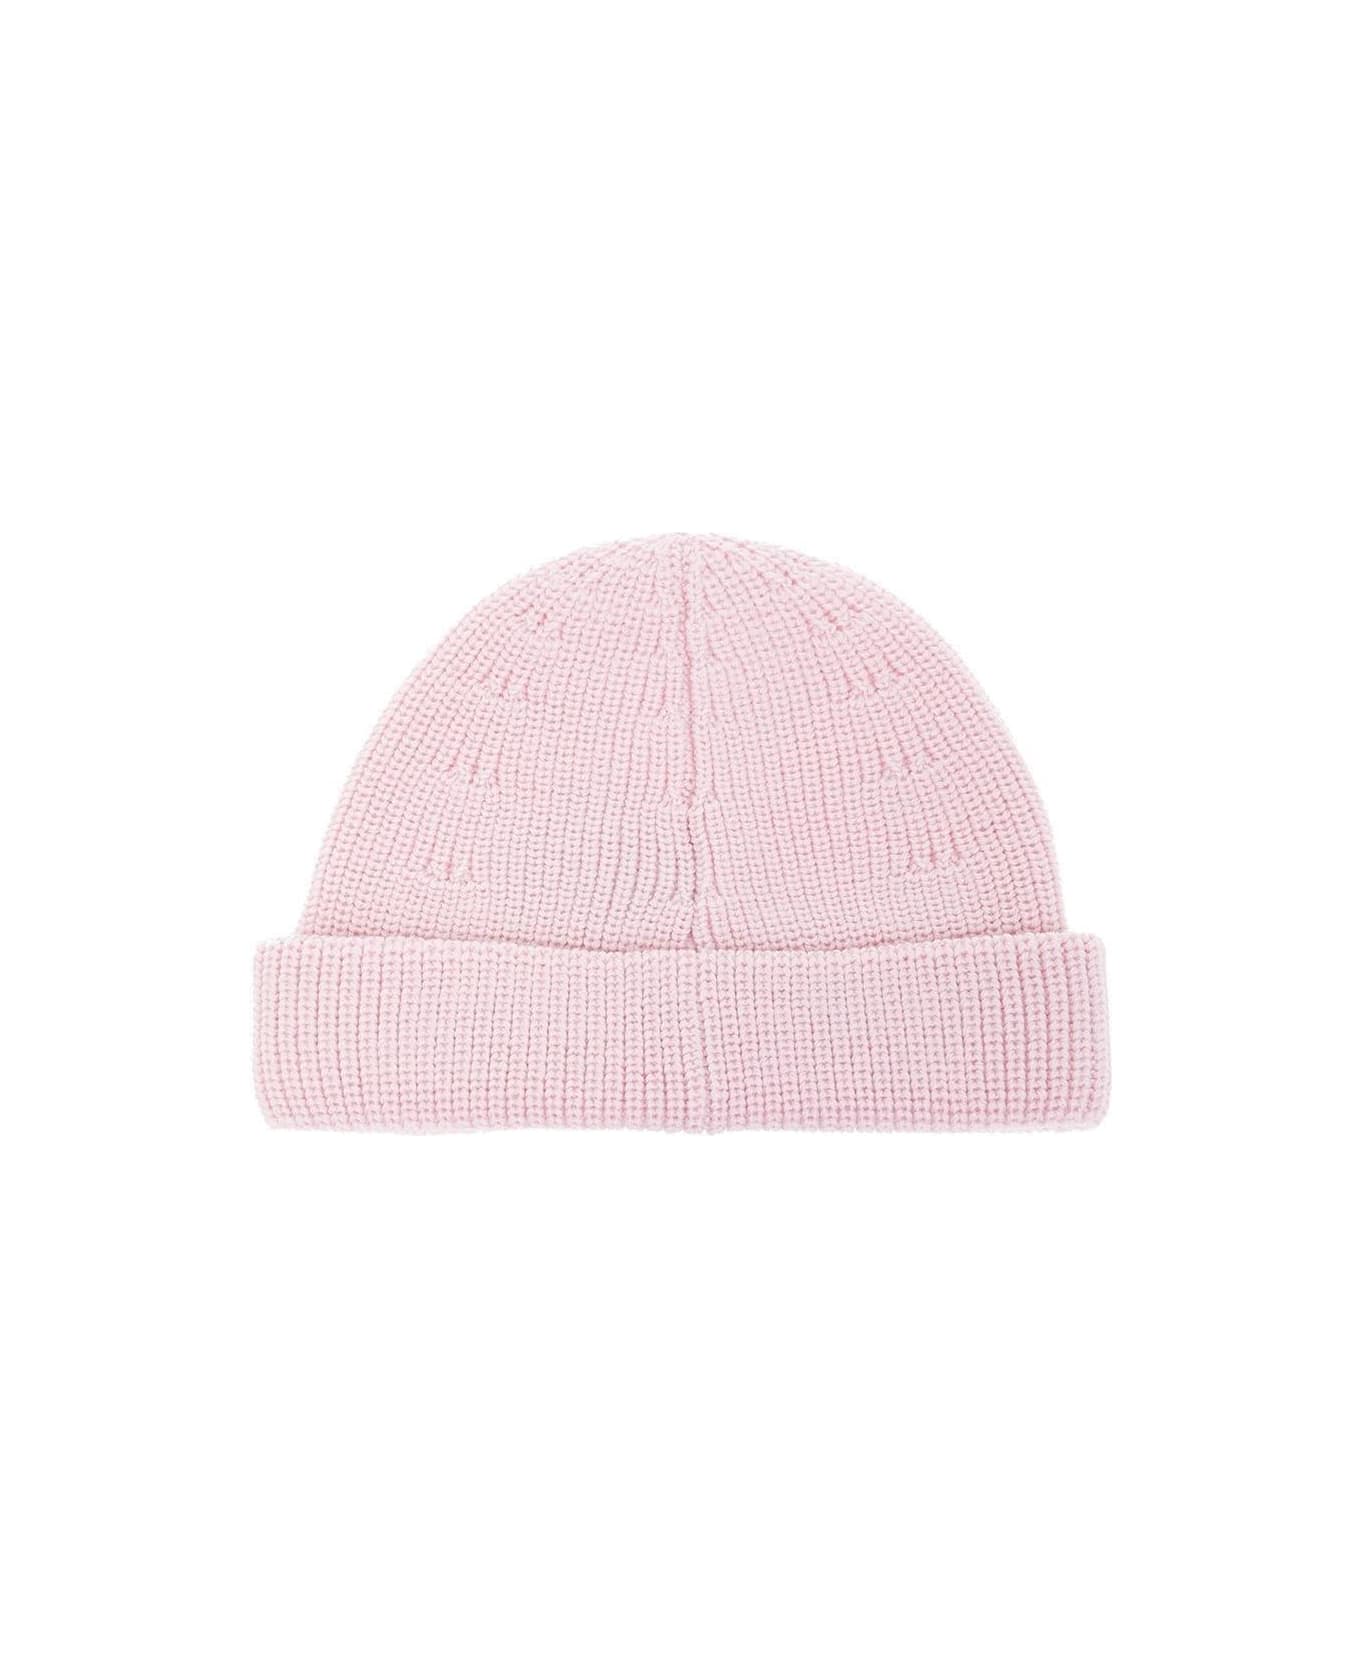 VETEMENTS Logo Embroidered Beanie - PINK